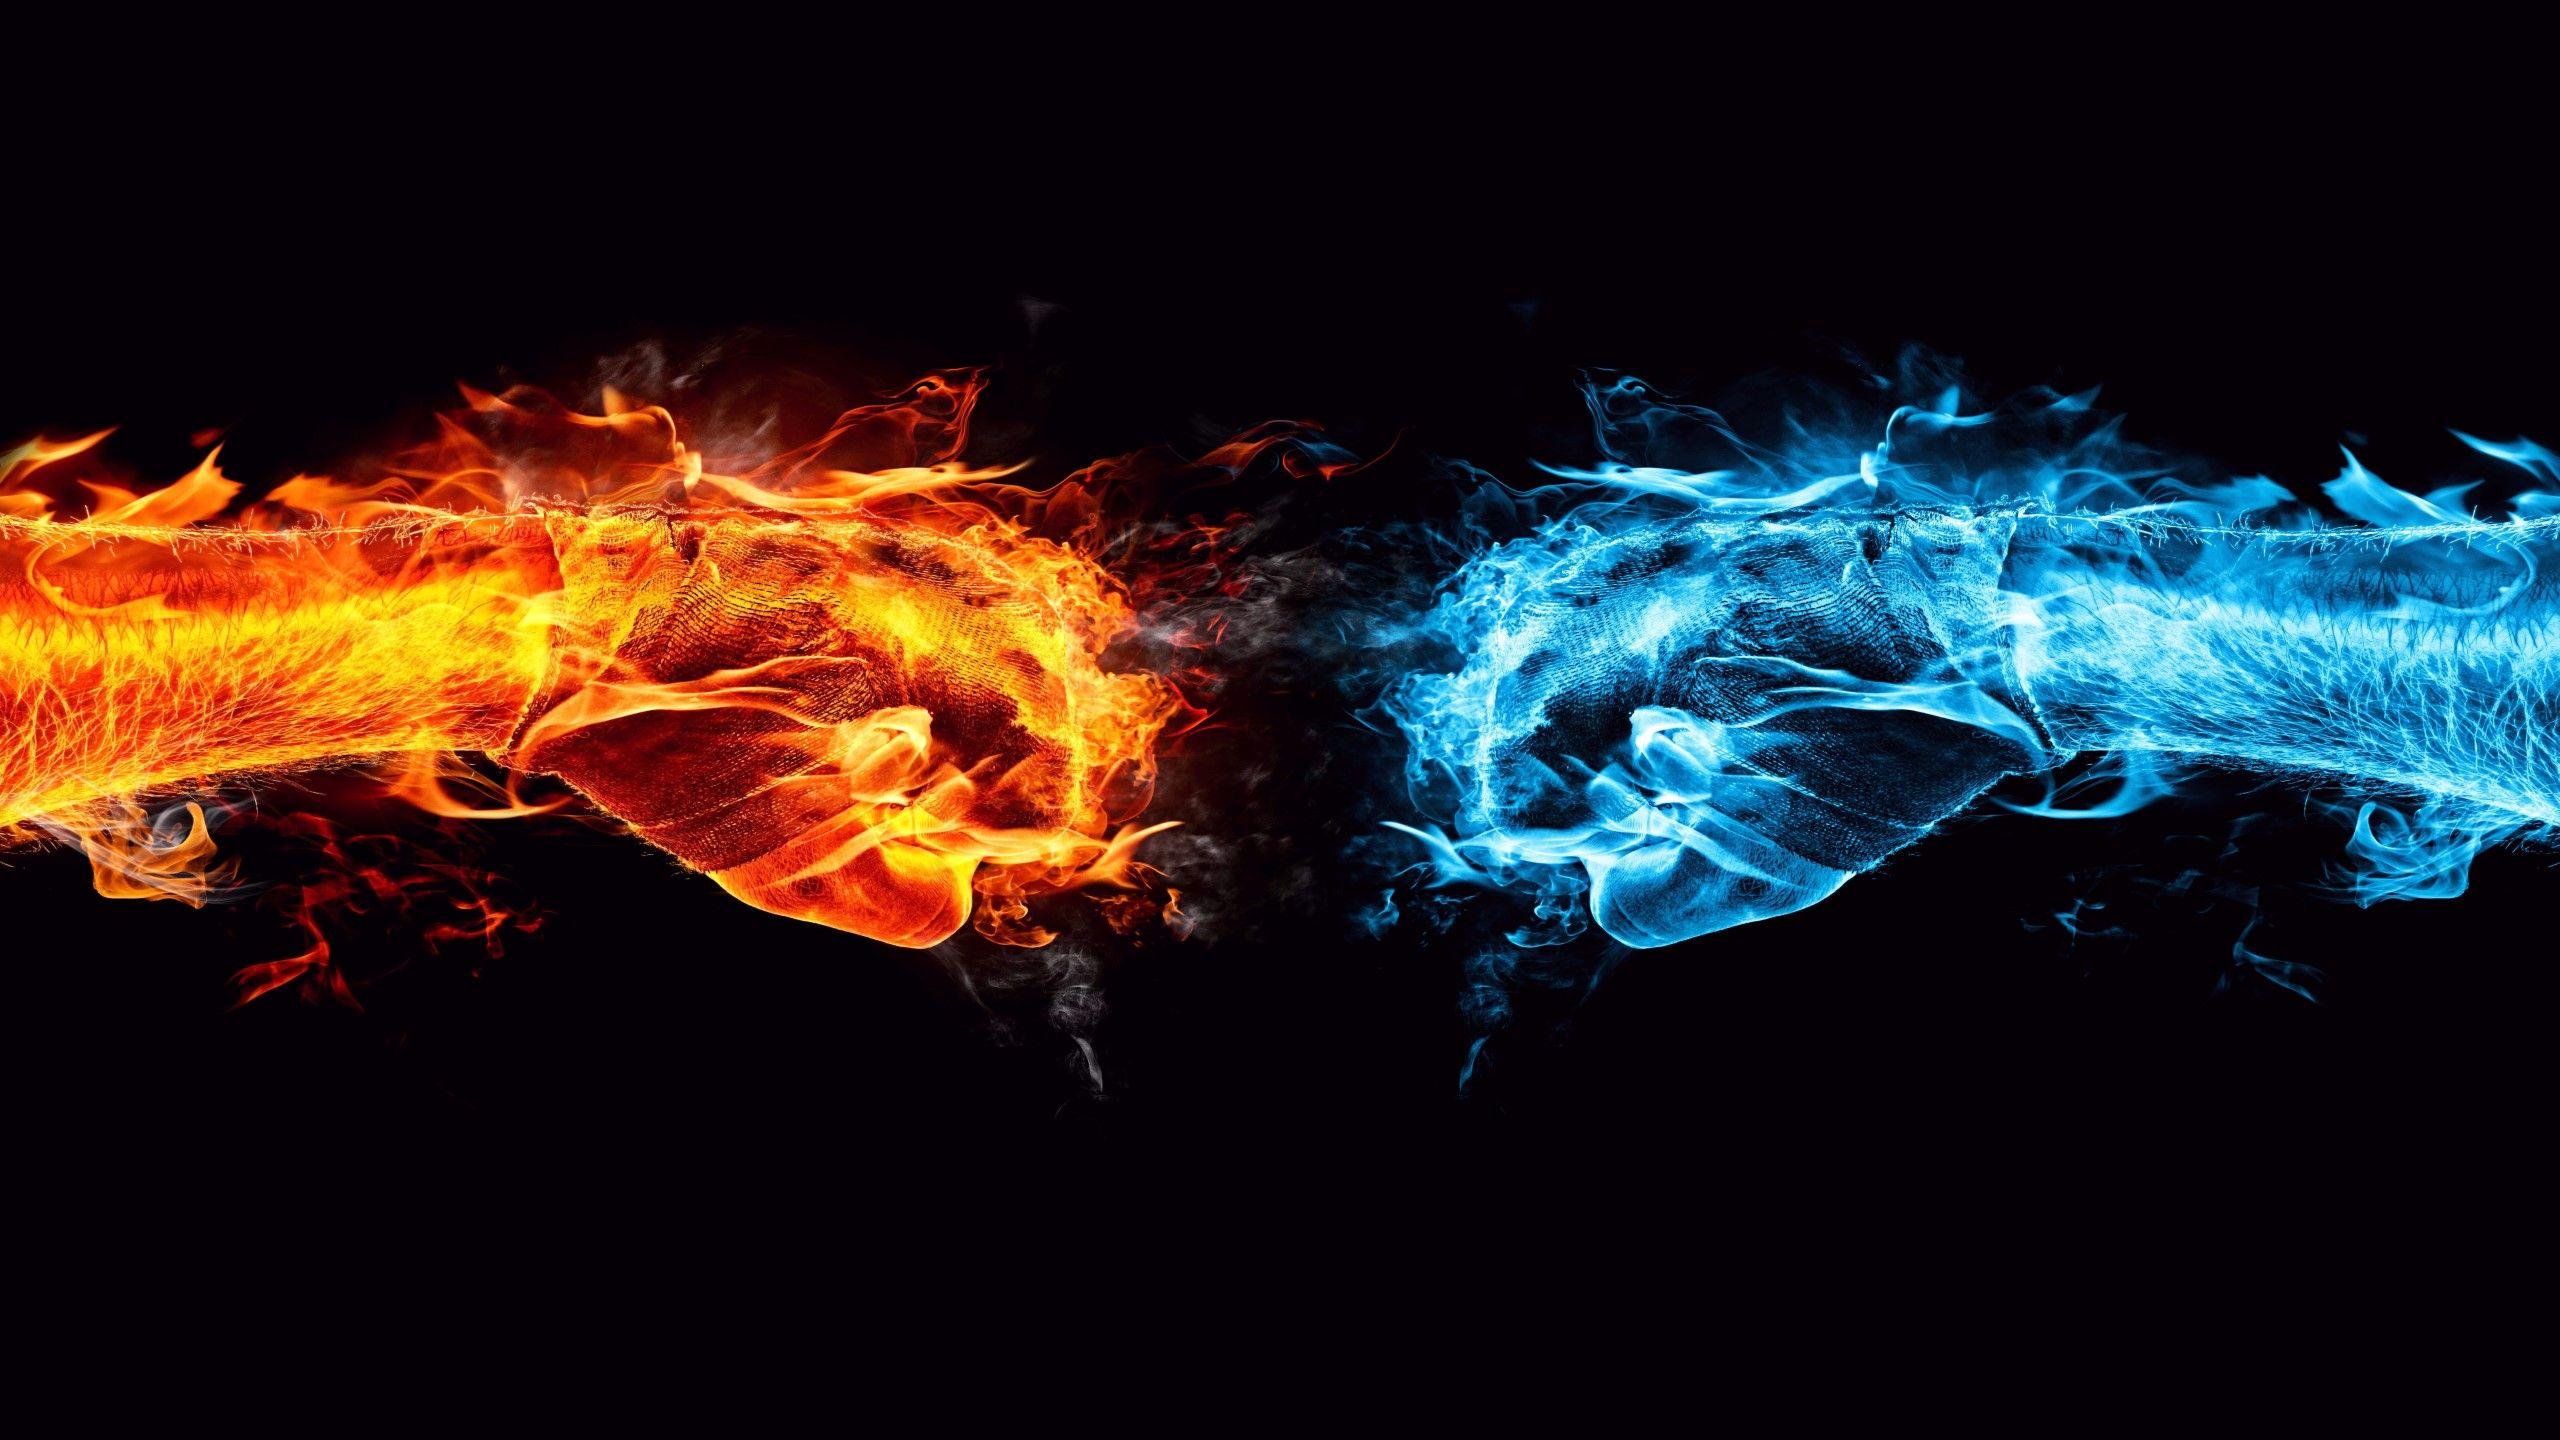 Fire and Ice Wallpaper Free Fire .wallpaperaccess.com